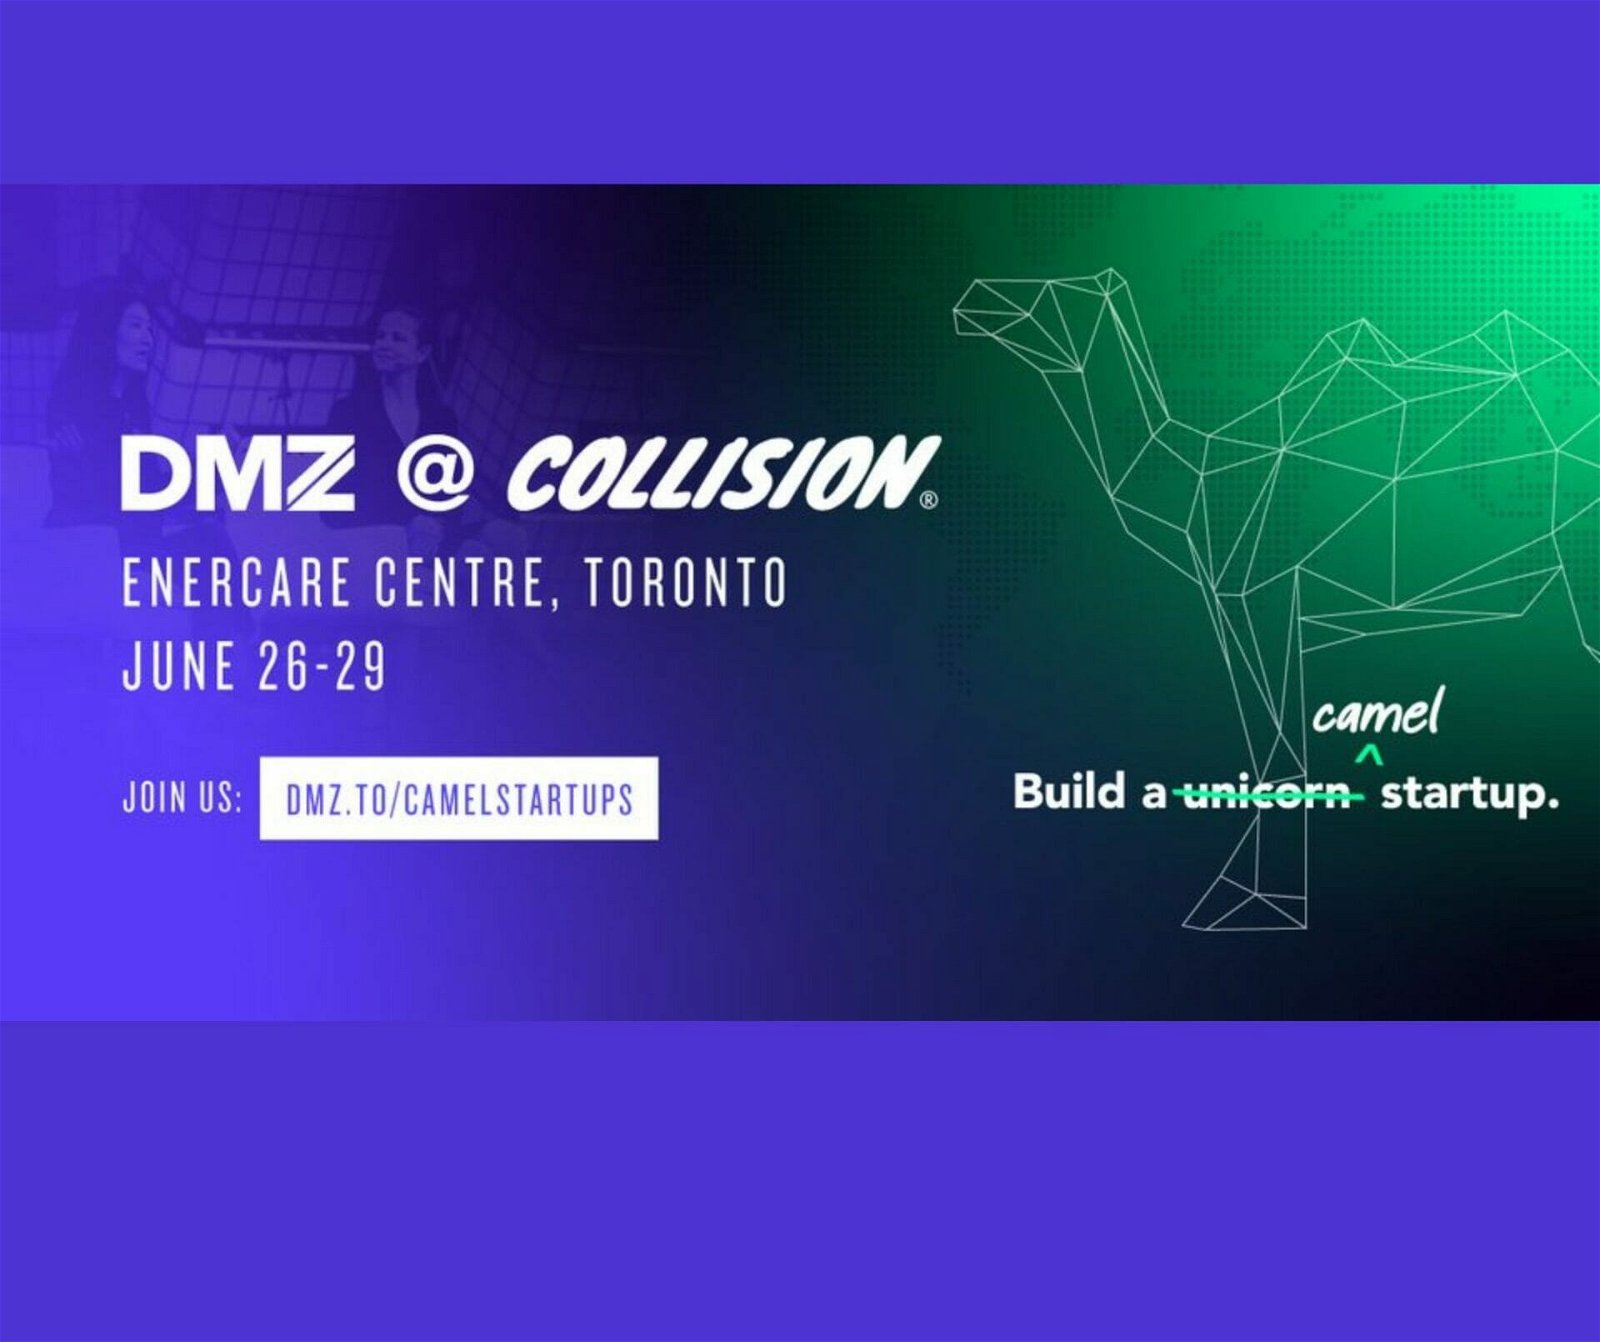 DMZ – Black Innovation Connections